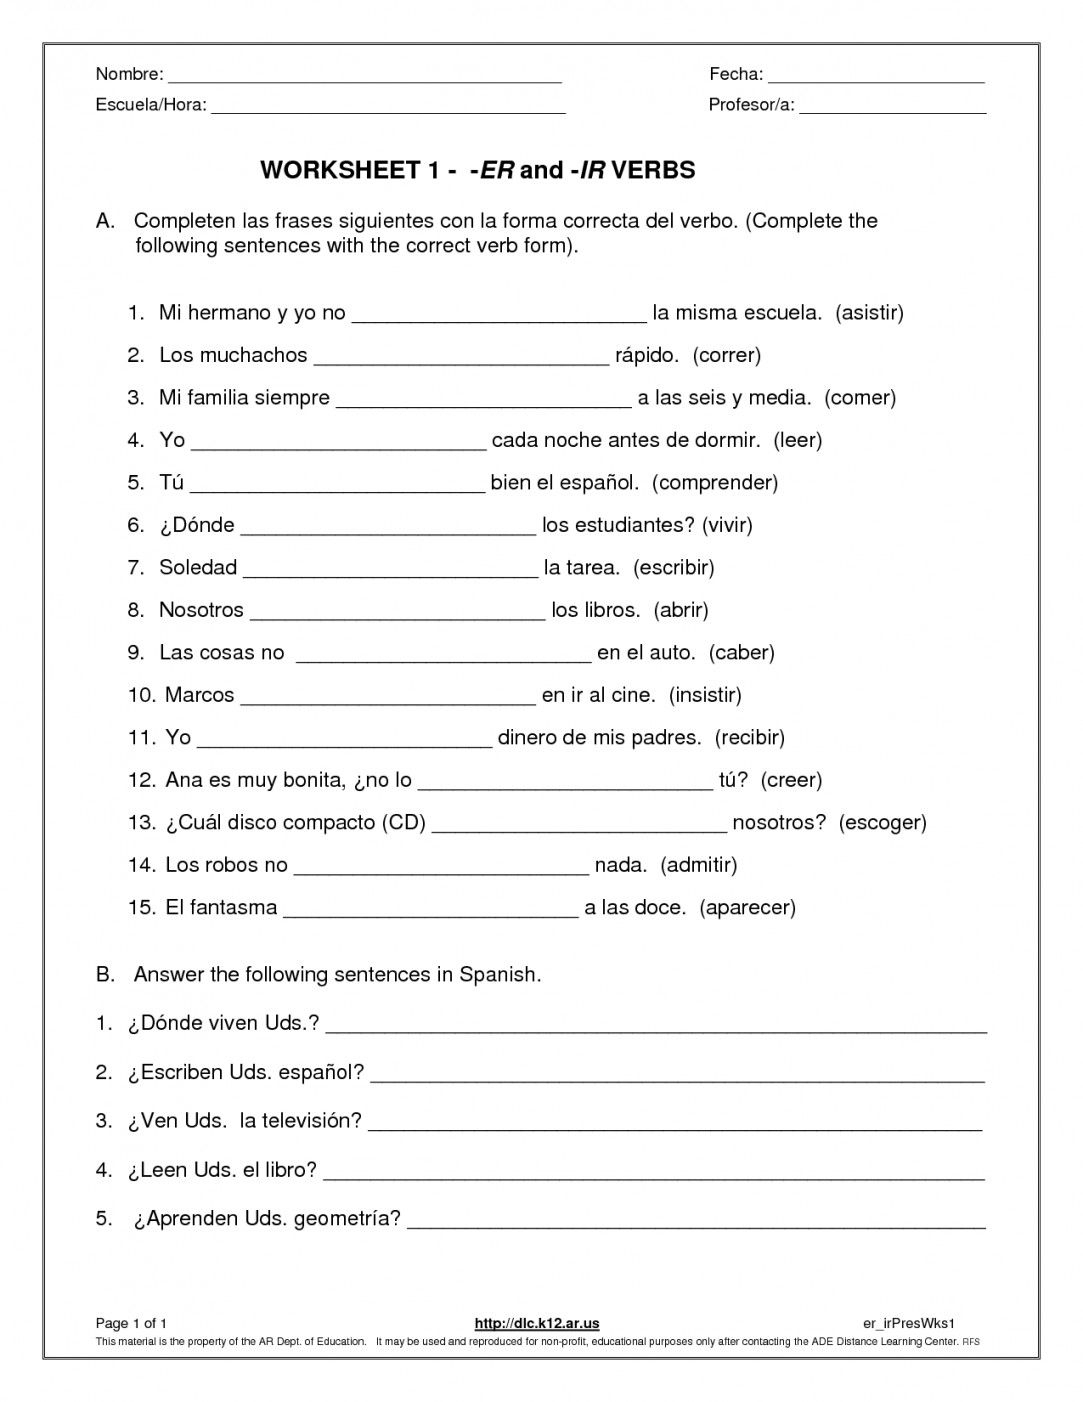 Free Printable Spanish Worksheets For Beginners | Lostranquillos | Free Printable Spanish Worksheets For Beginners